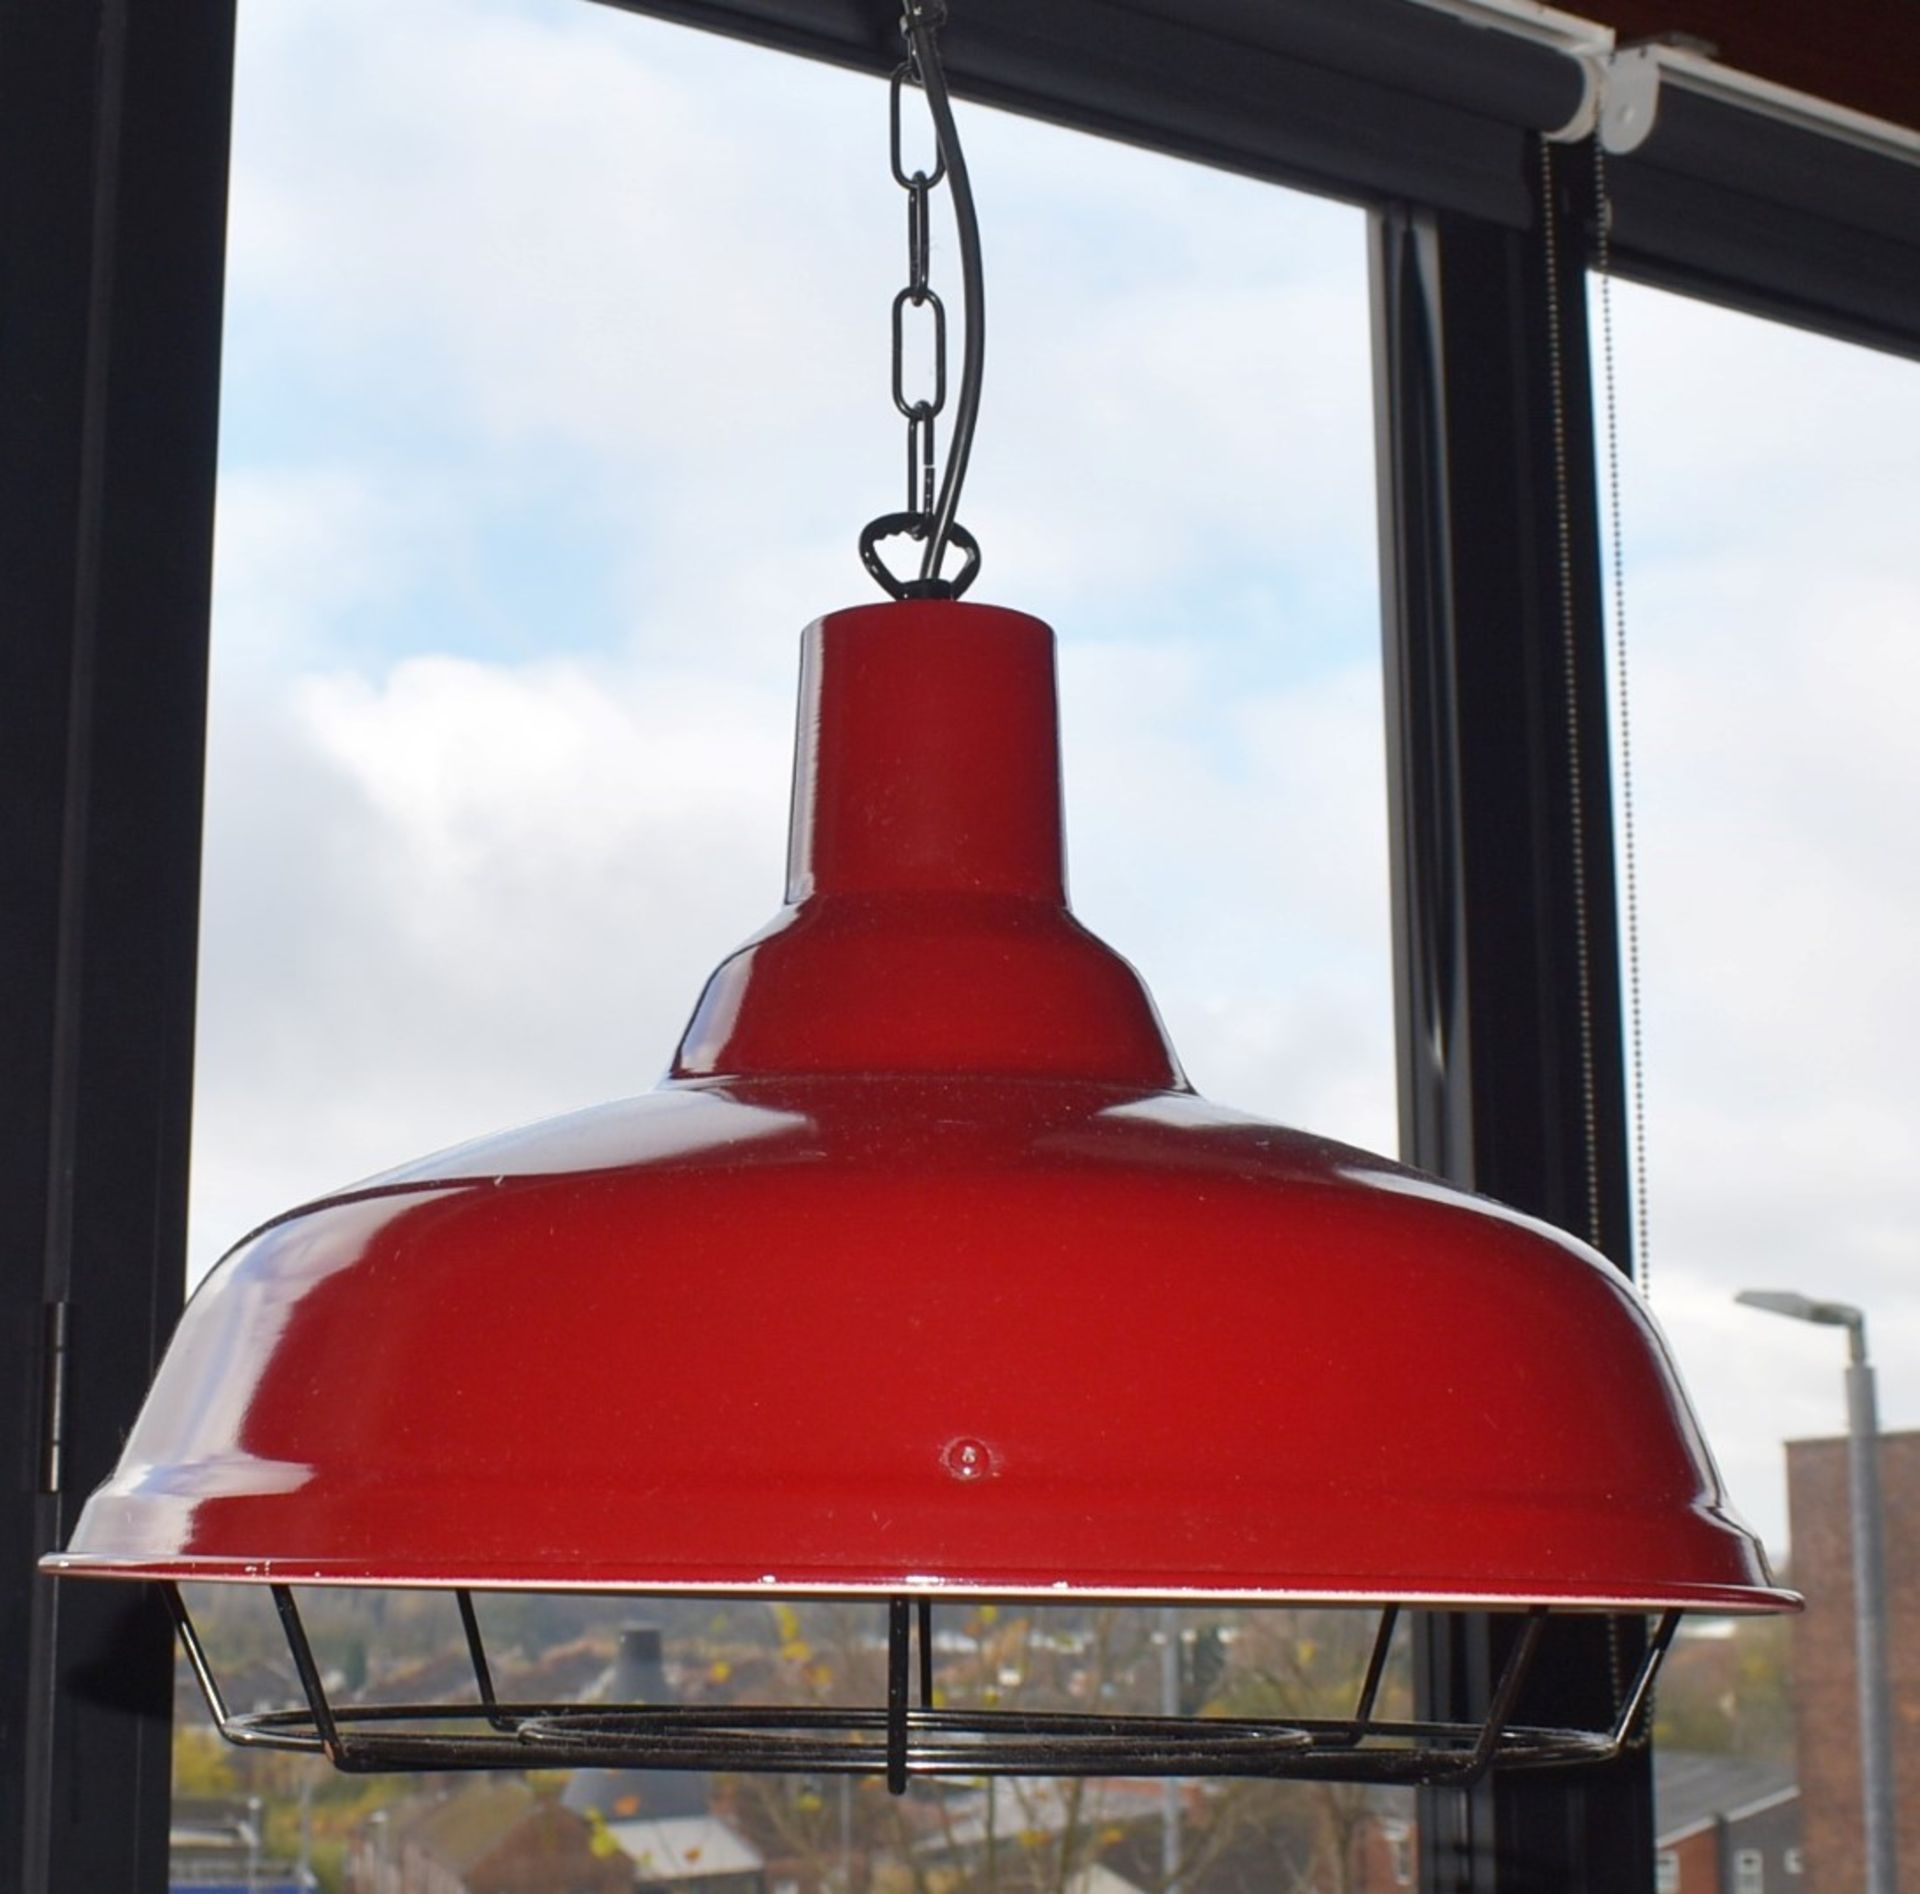 4 x Industrial Style Light Pendants With Cage - Contemporary Red Finish - 45cm Diameter 100cm Drop - Image 5 of 7